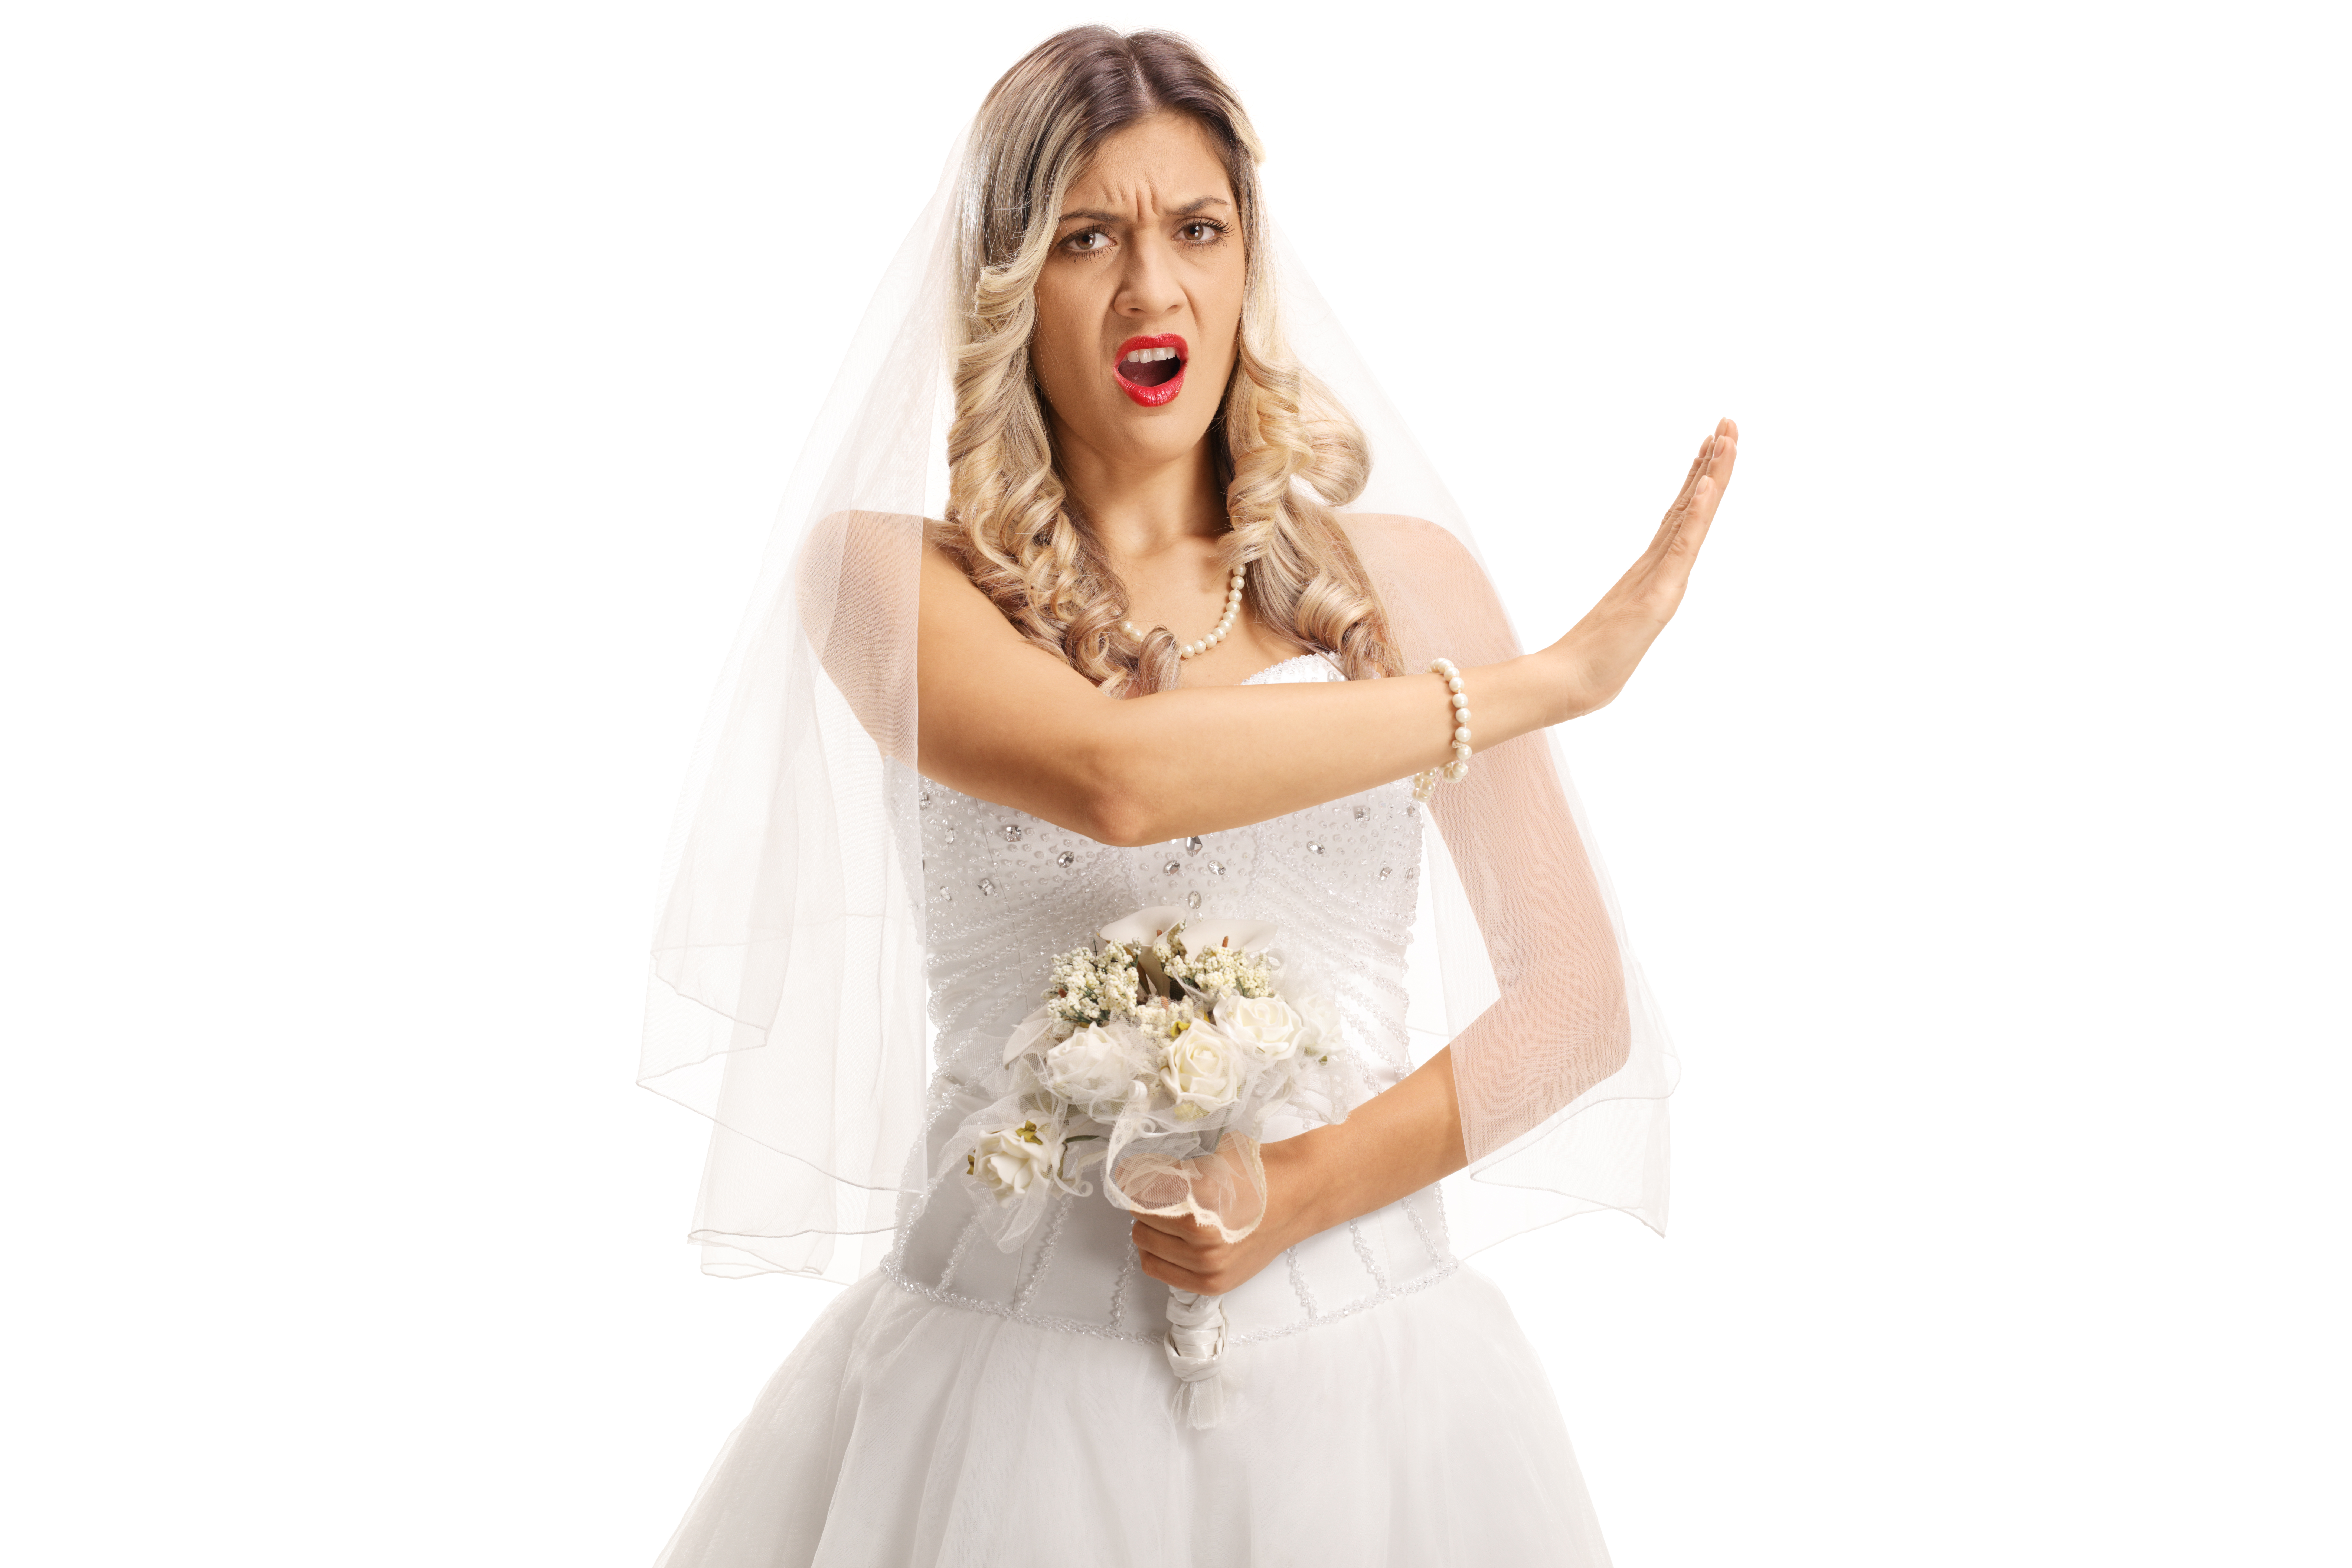 An angry bride in her wedding gear gesturing with her hand | Source: Shutterstock